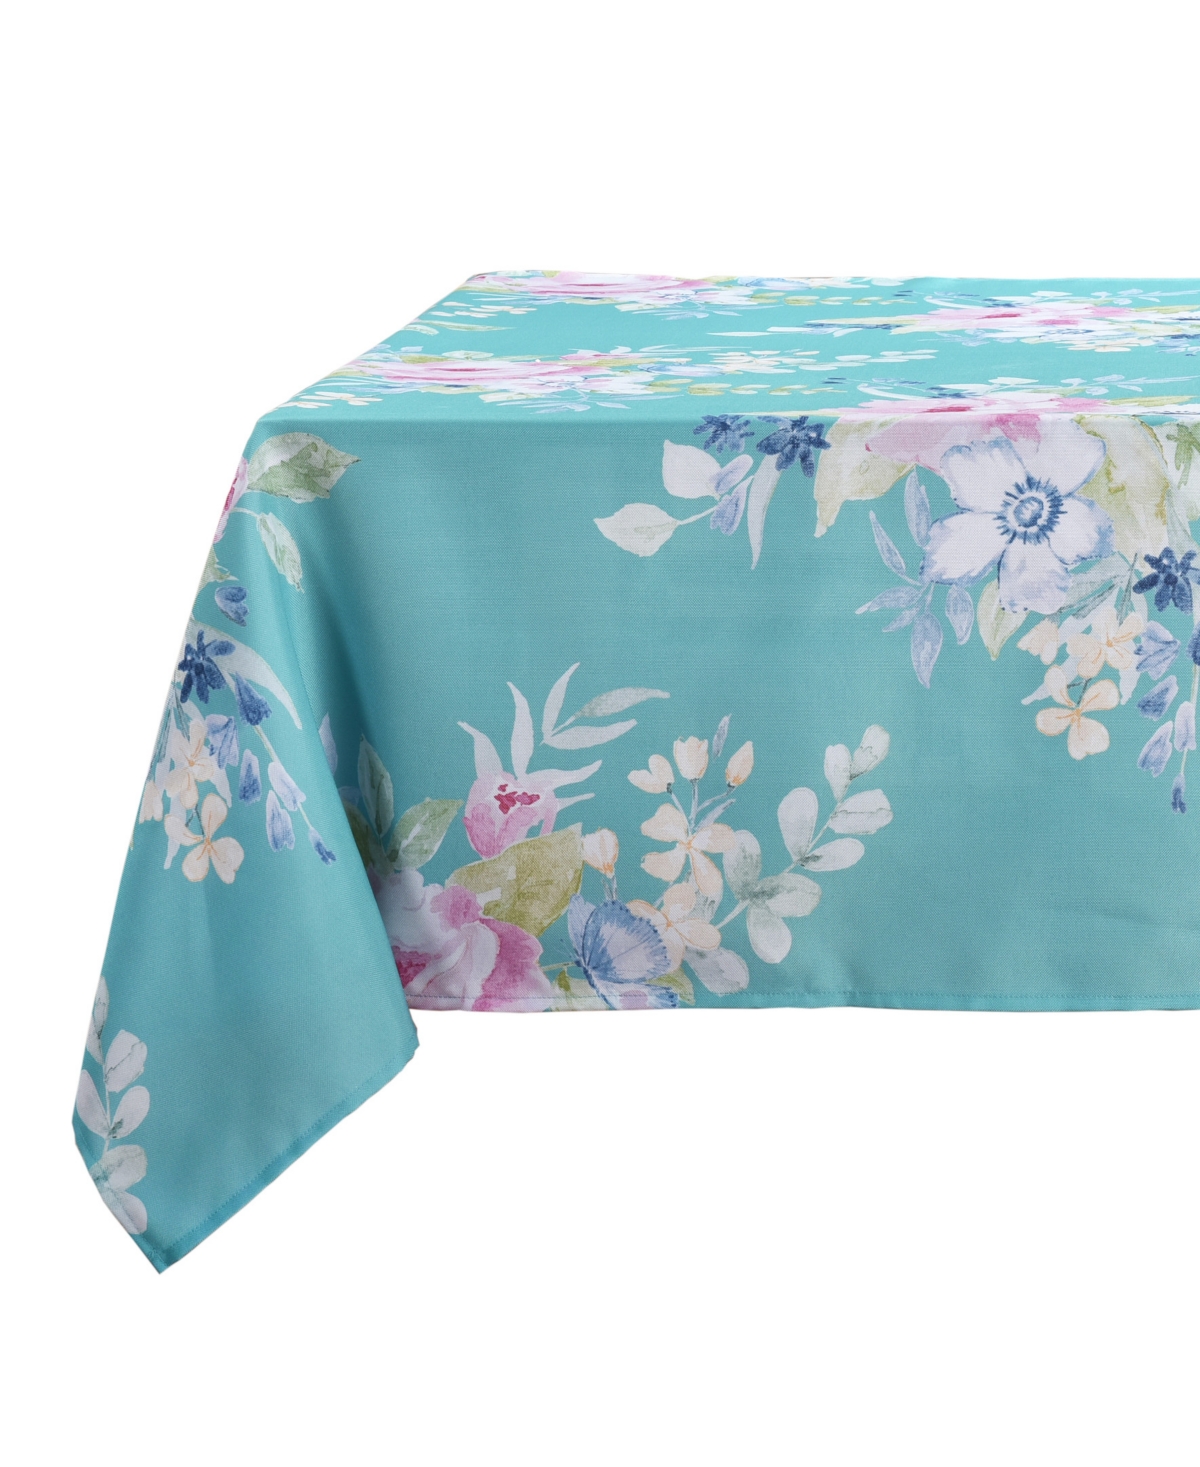 J Queen New York Esme Tablecloth 52 X 70 In Turquoise